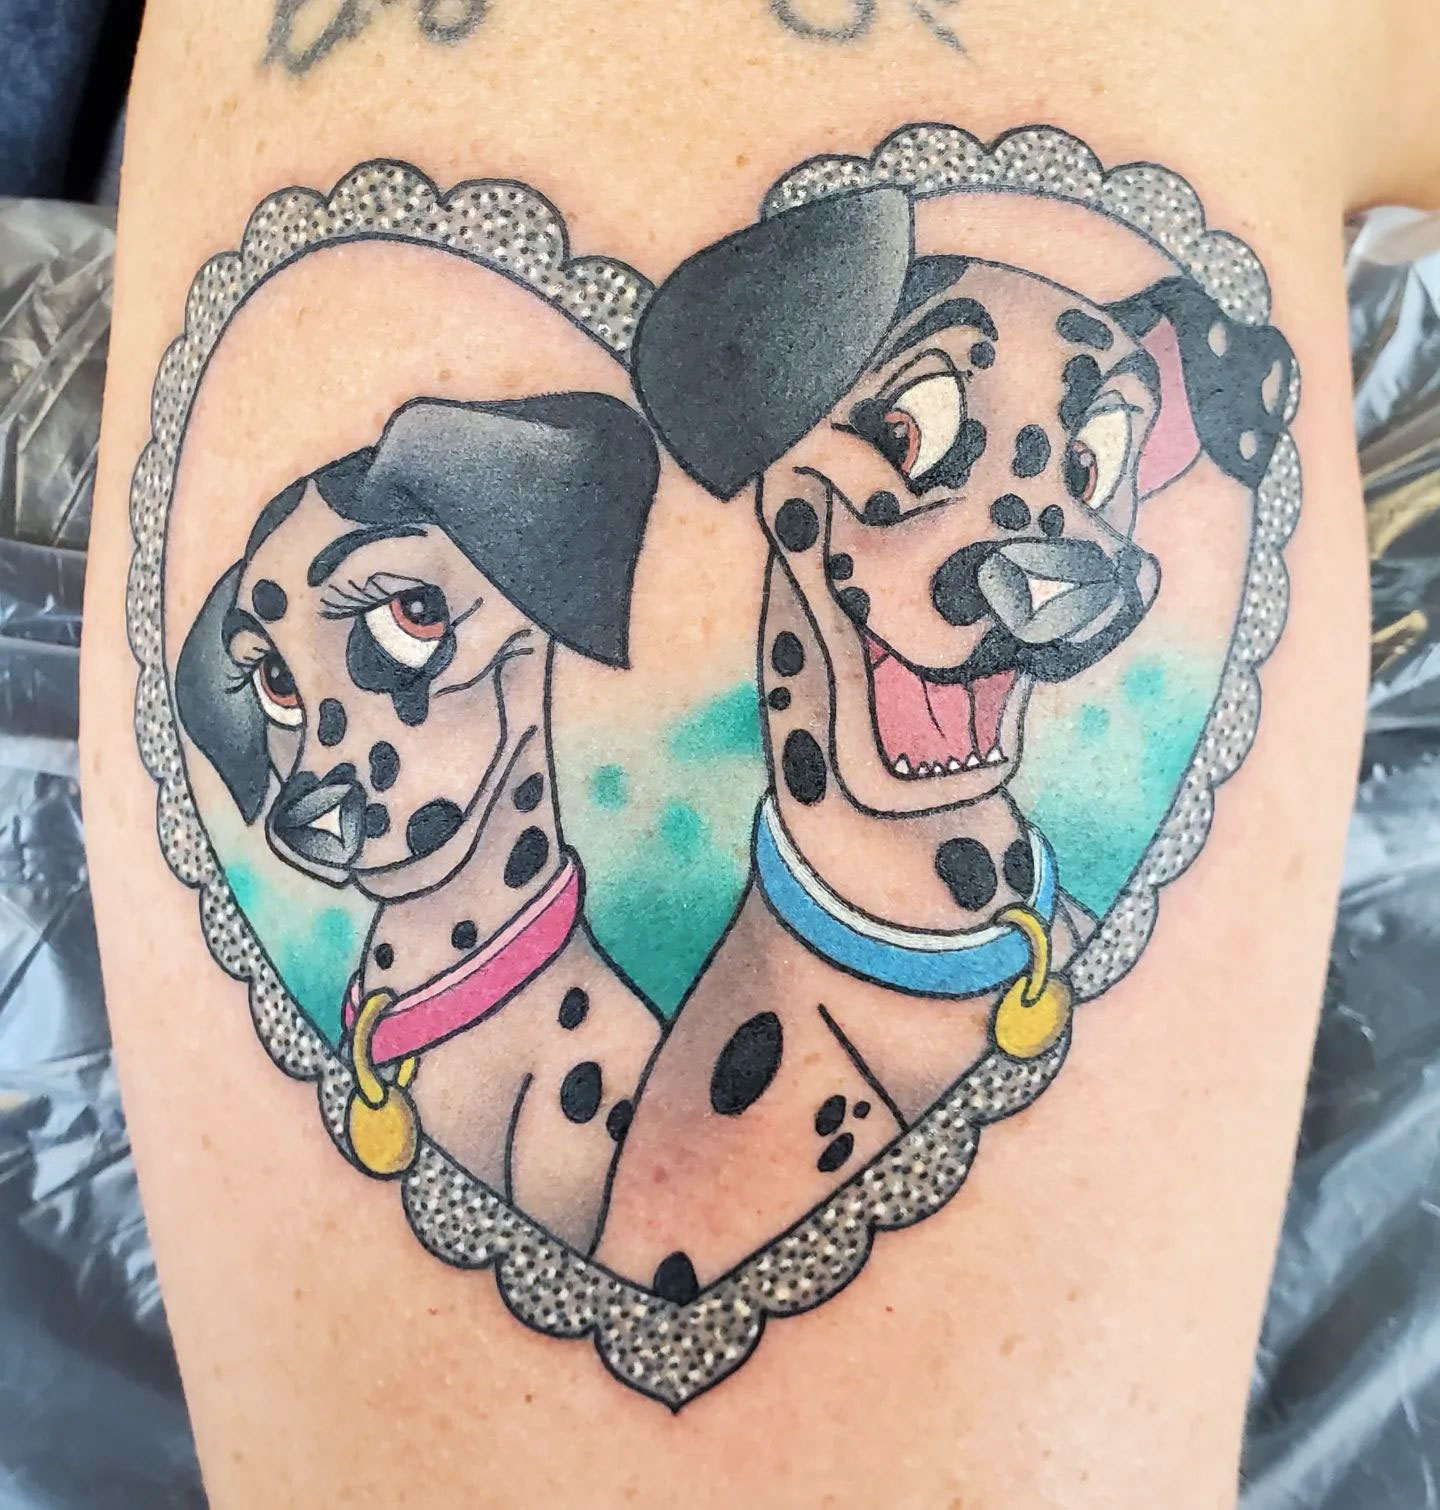 The Silver Key on X: "101 Dalmatians tattoo modified with the spots of the client's Dalmatians! Tattoo done by the talented, Doozer Soto. # 101dalmatians #101dalmatianstattoo #doozersototattoo #dalmatiantattoo #iowatattoo #quadcities ...